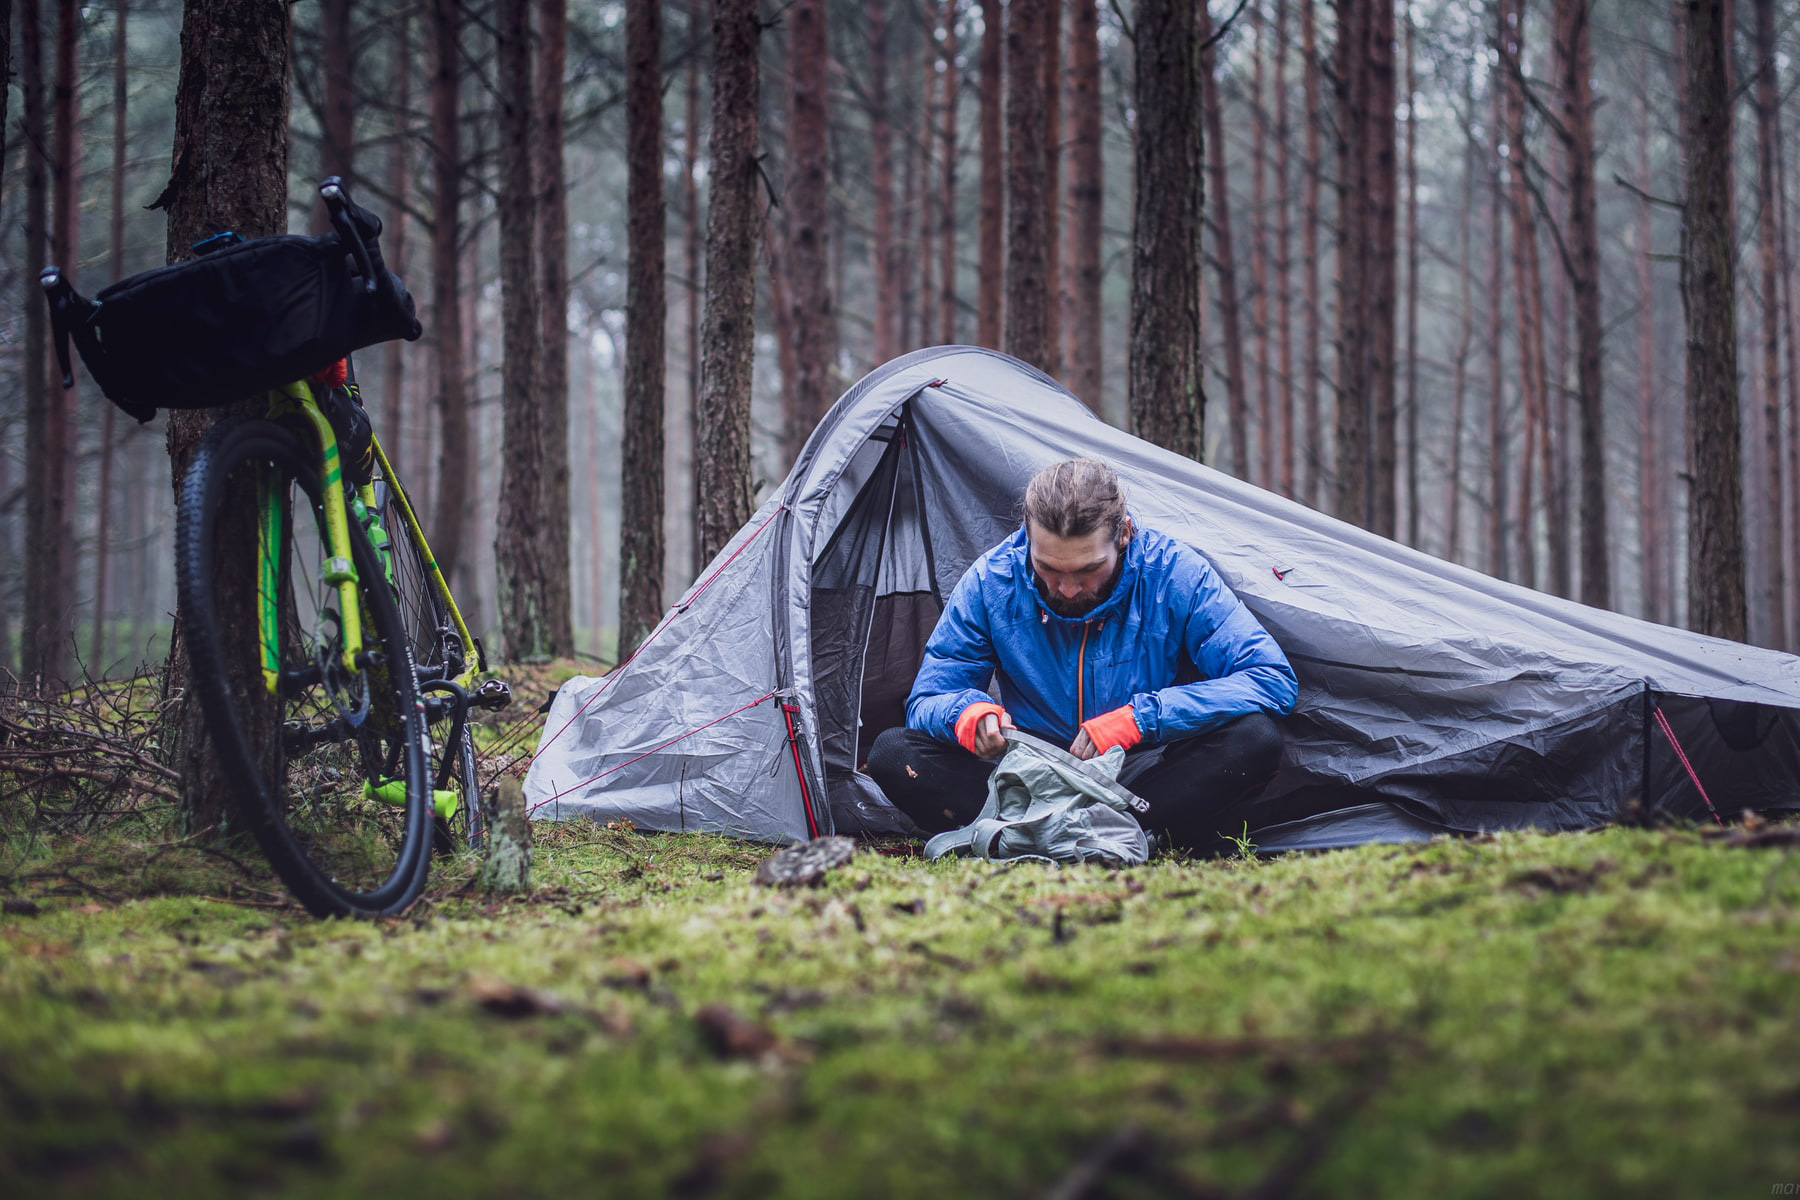 The best tents for heavy rain can protect campers in even the worst weather.